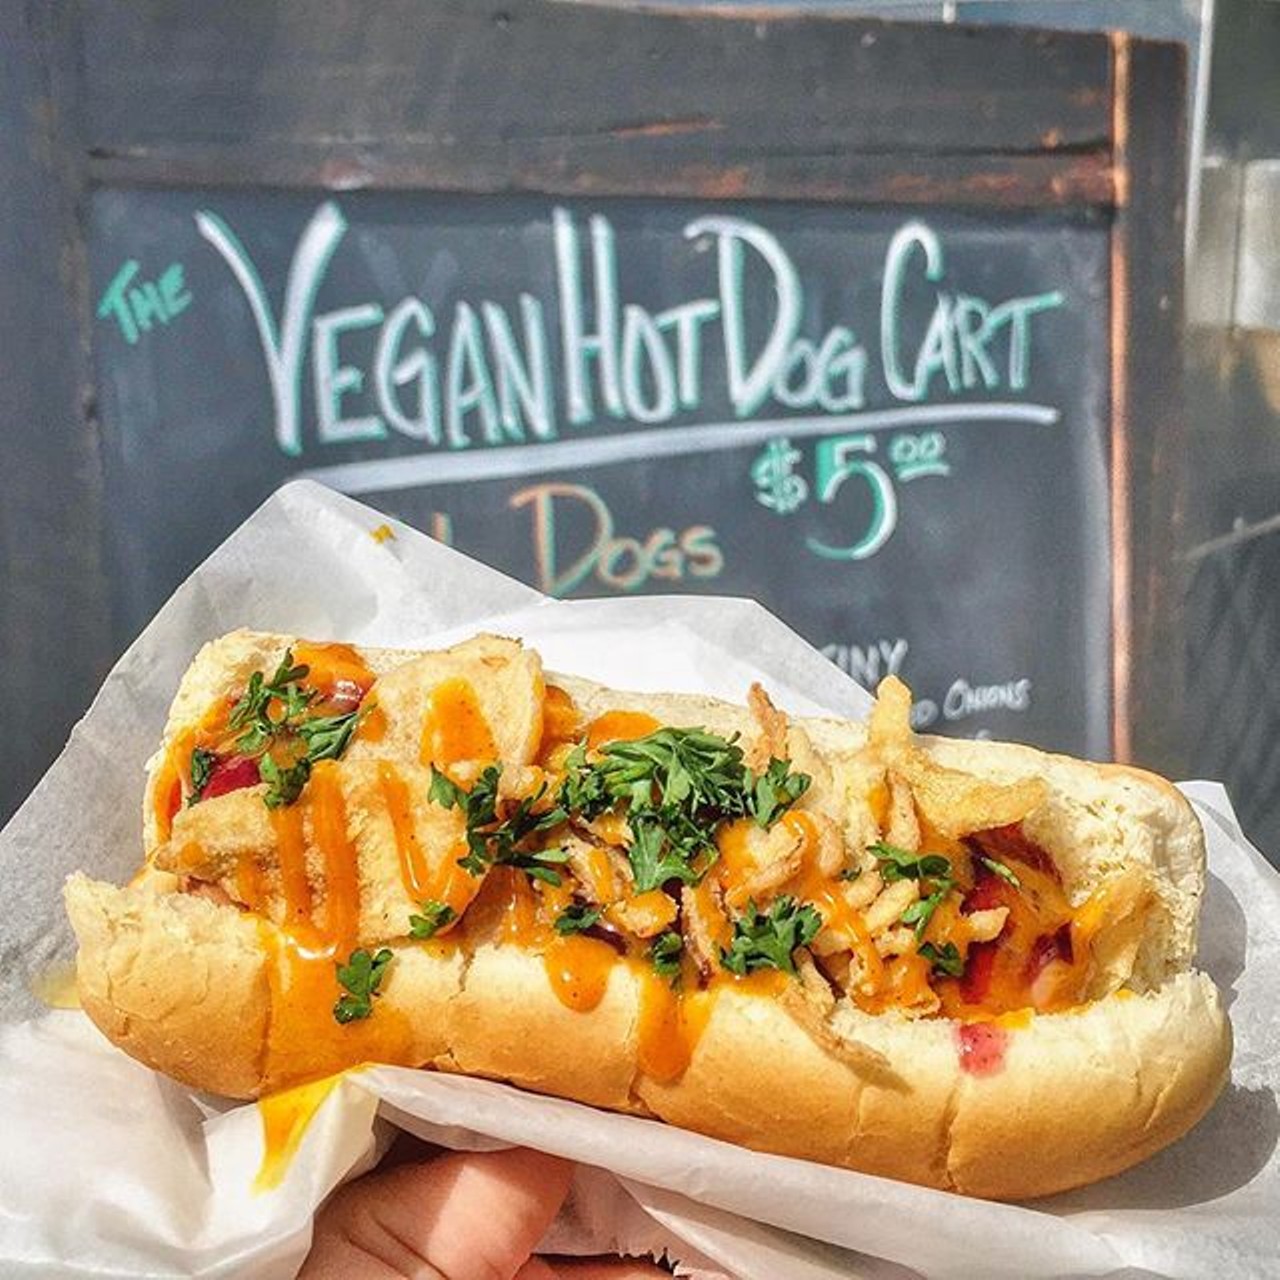 Vegan Hot Dog Cart
65 N. Orange Ave., 321-303-3689
This cart has been helping settle drunk stomachs since like forever. It&#146;s open until 3 a.m. for all your drunk eat needs.
Photo via theorlandogirl/Instagram